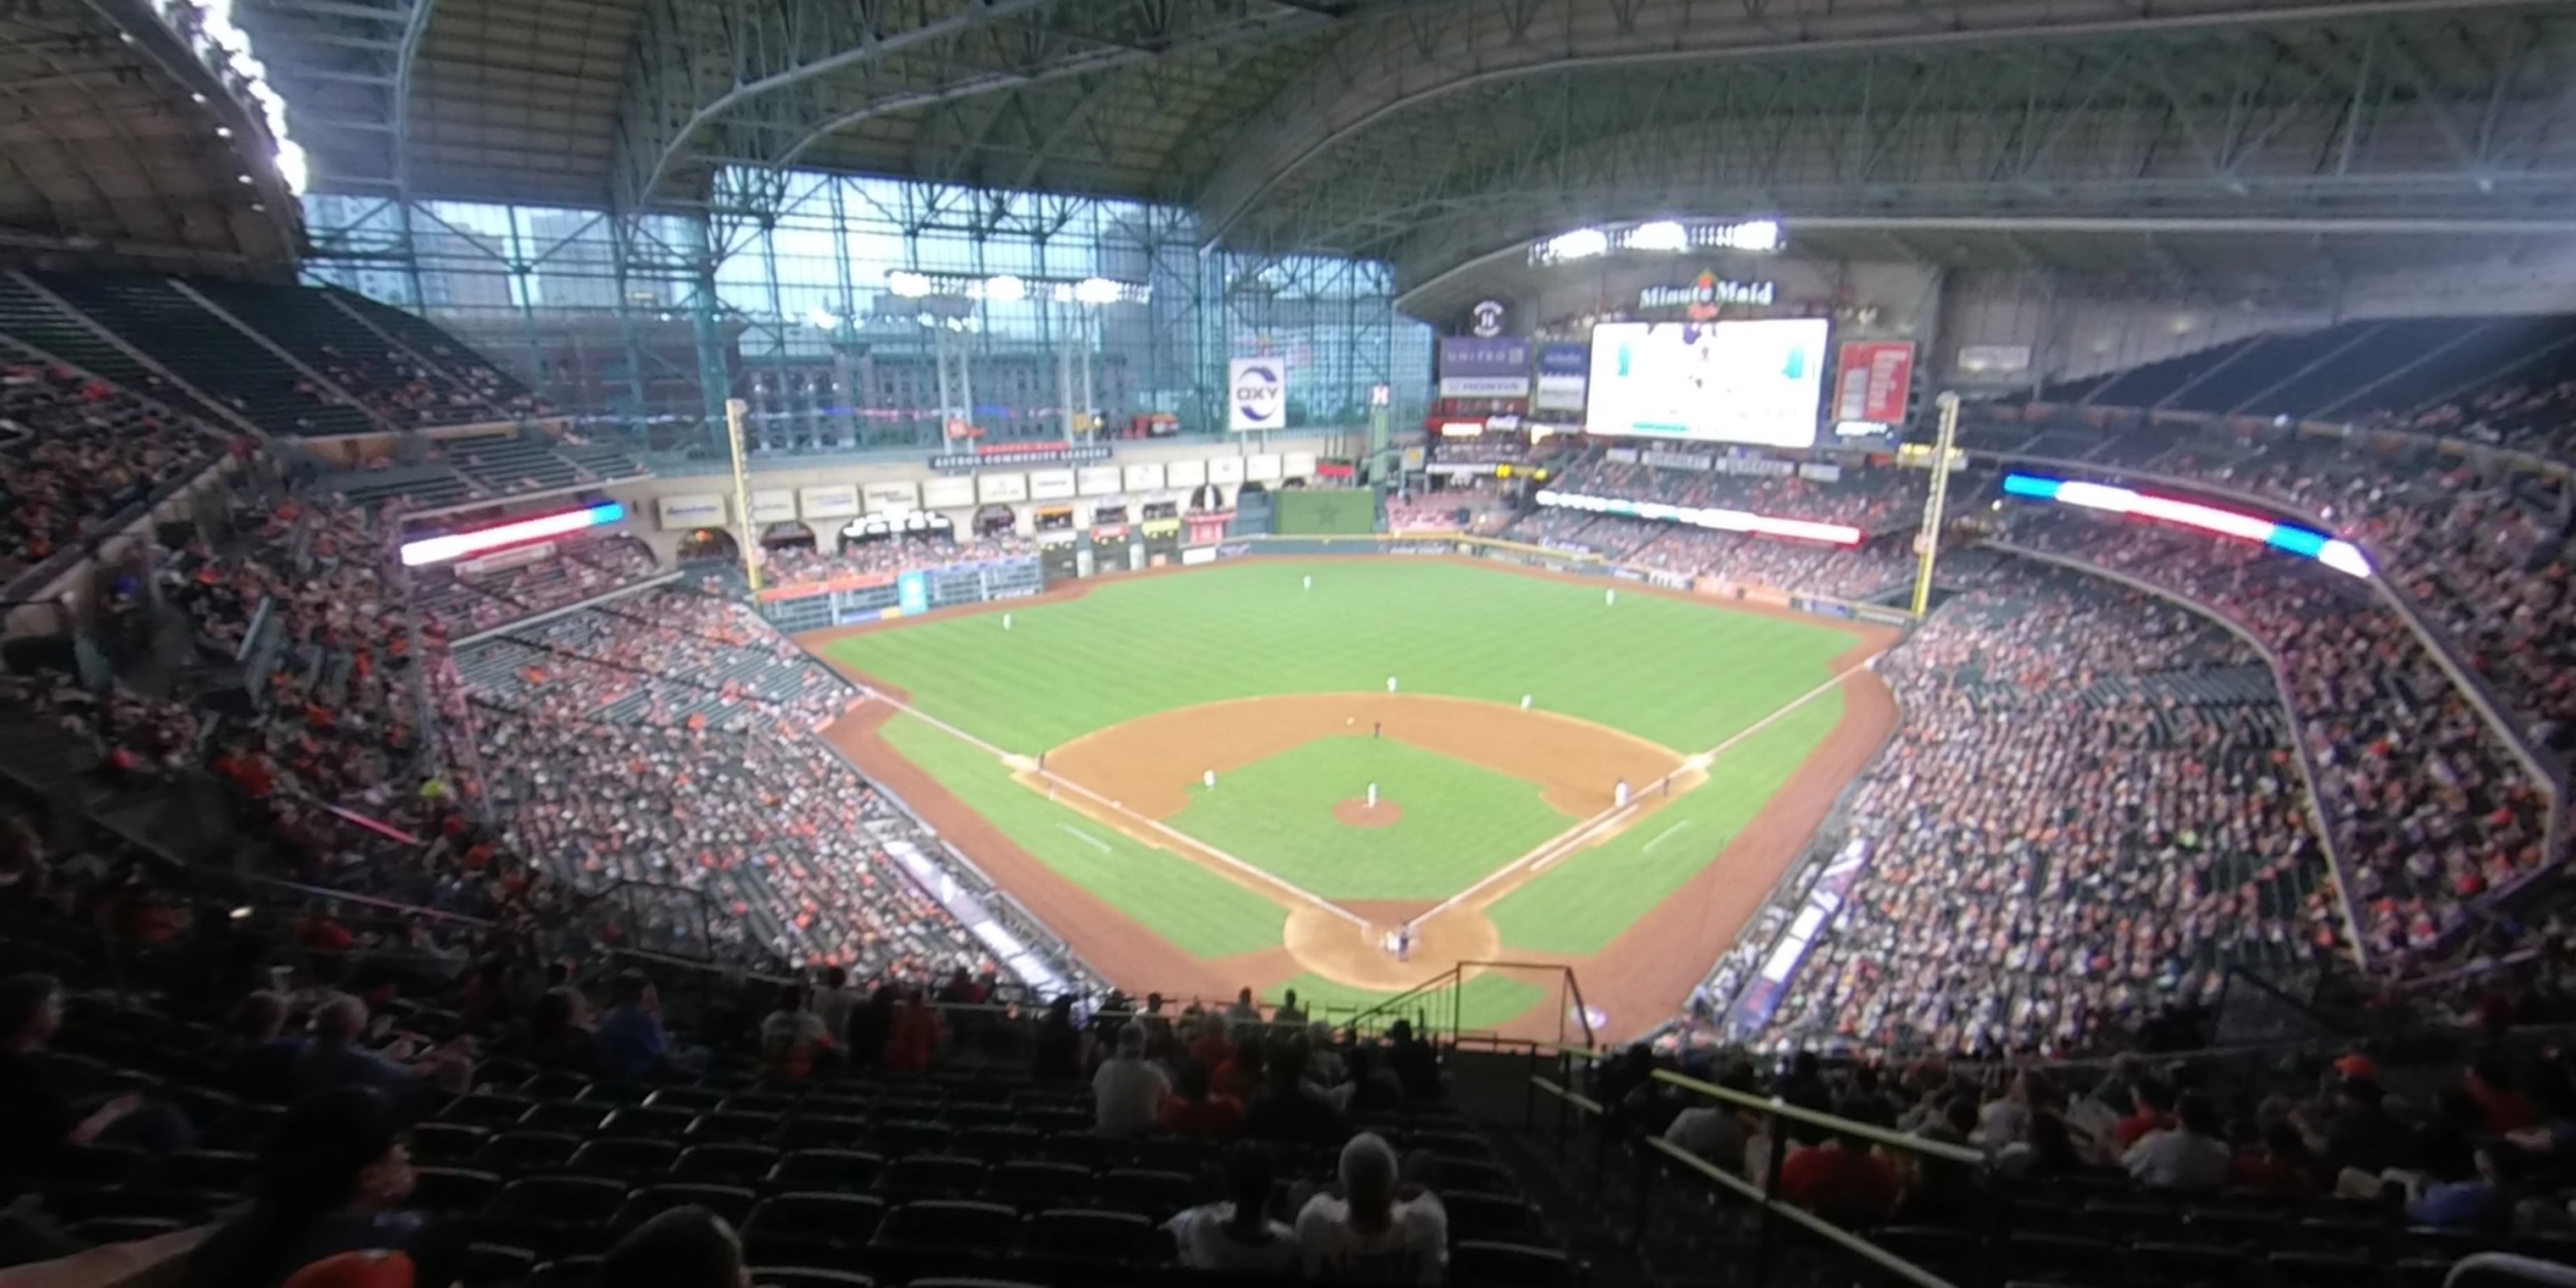 section 418 panoramic seat view  for baseball - minute maid park